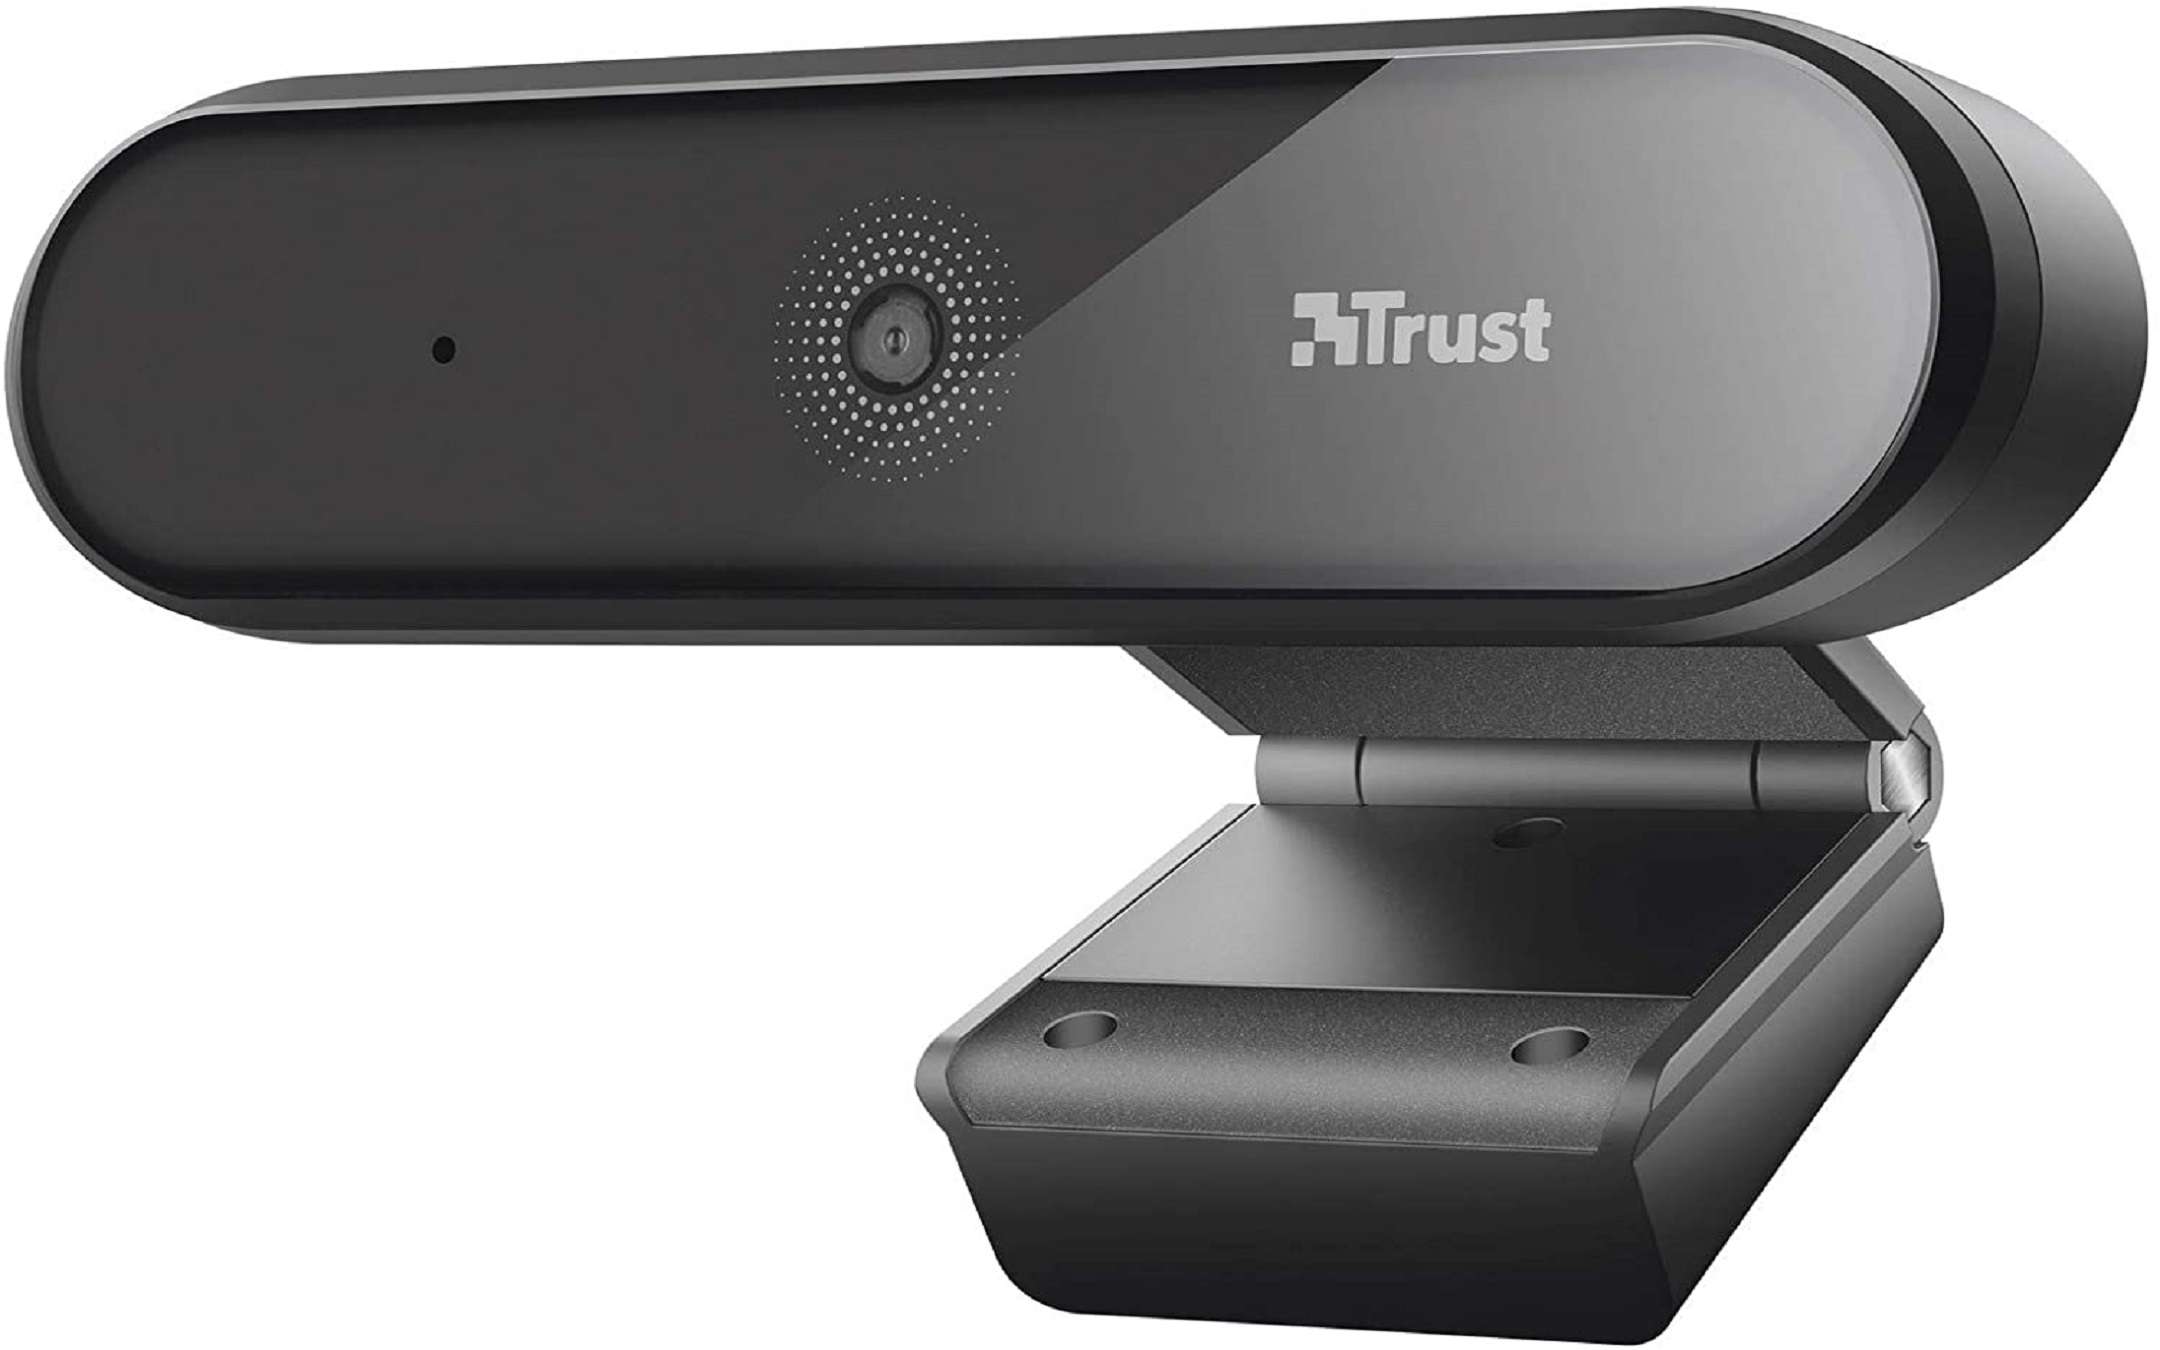 Trust Tyro webcam: FullHD and super discount on Amazon